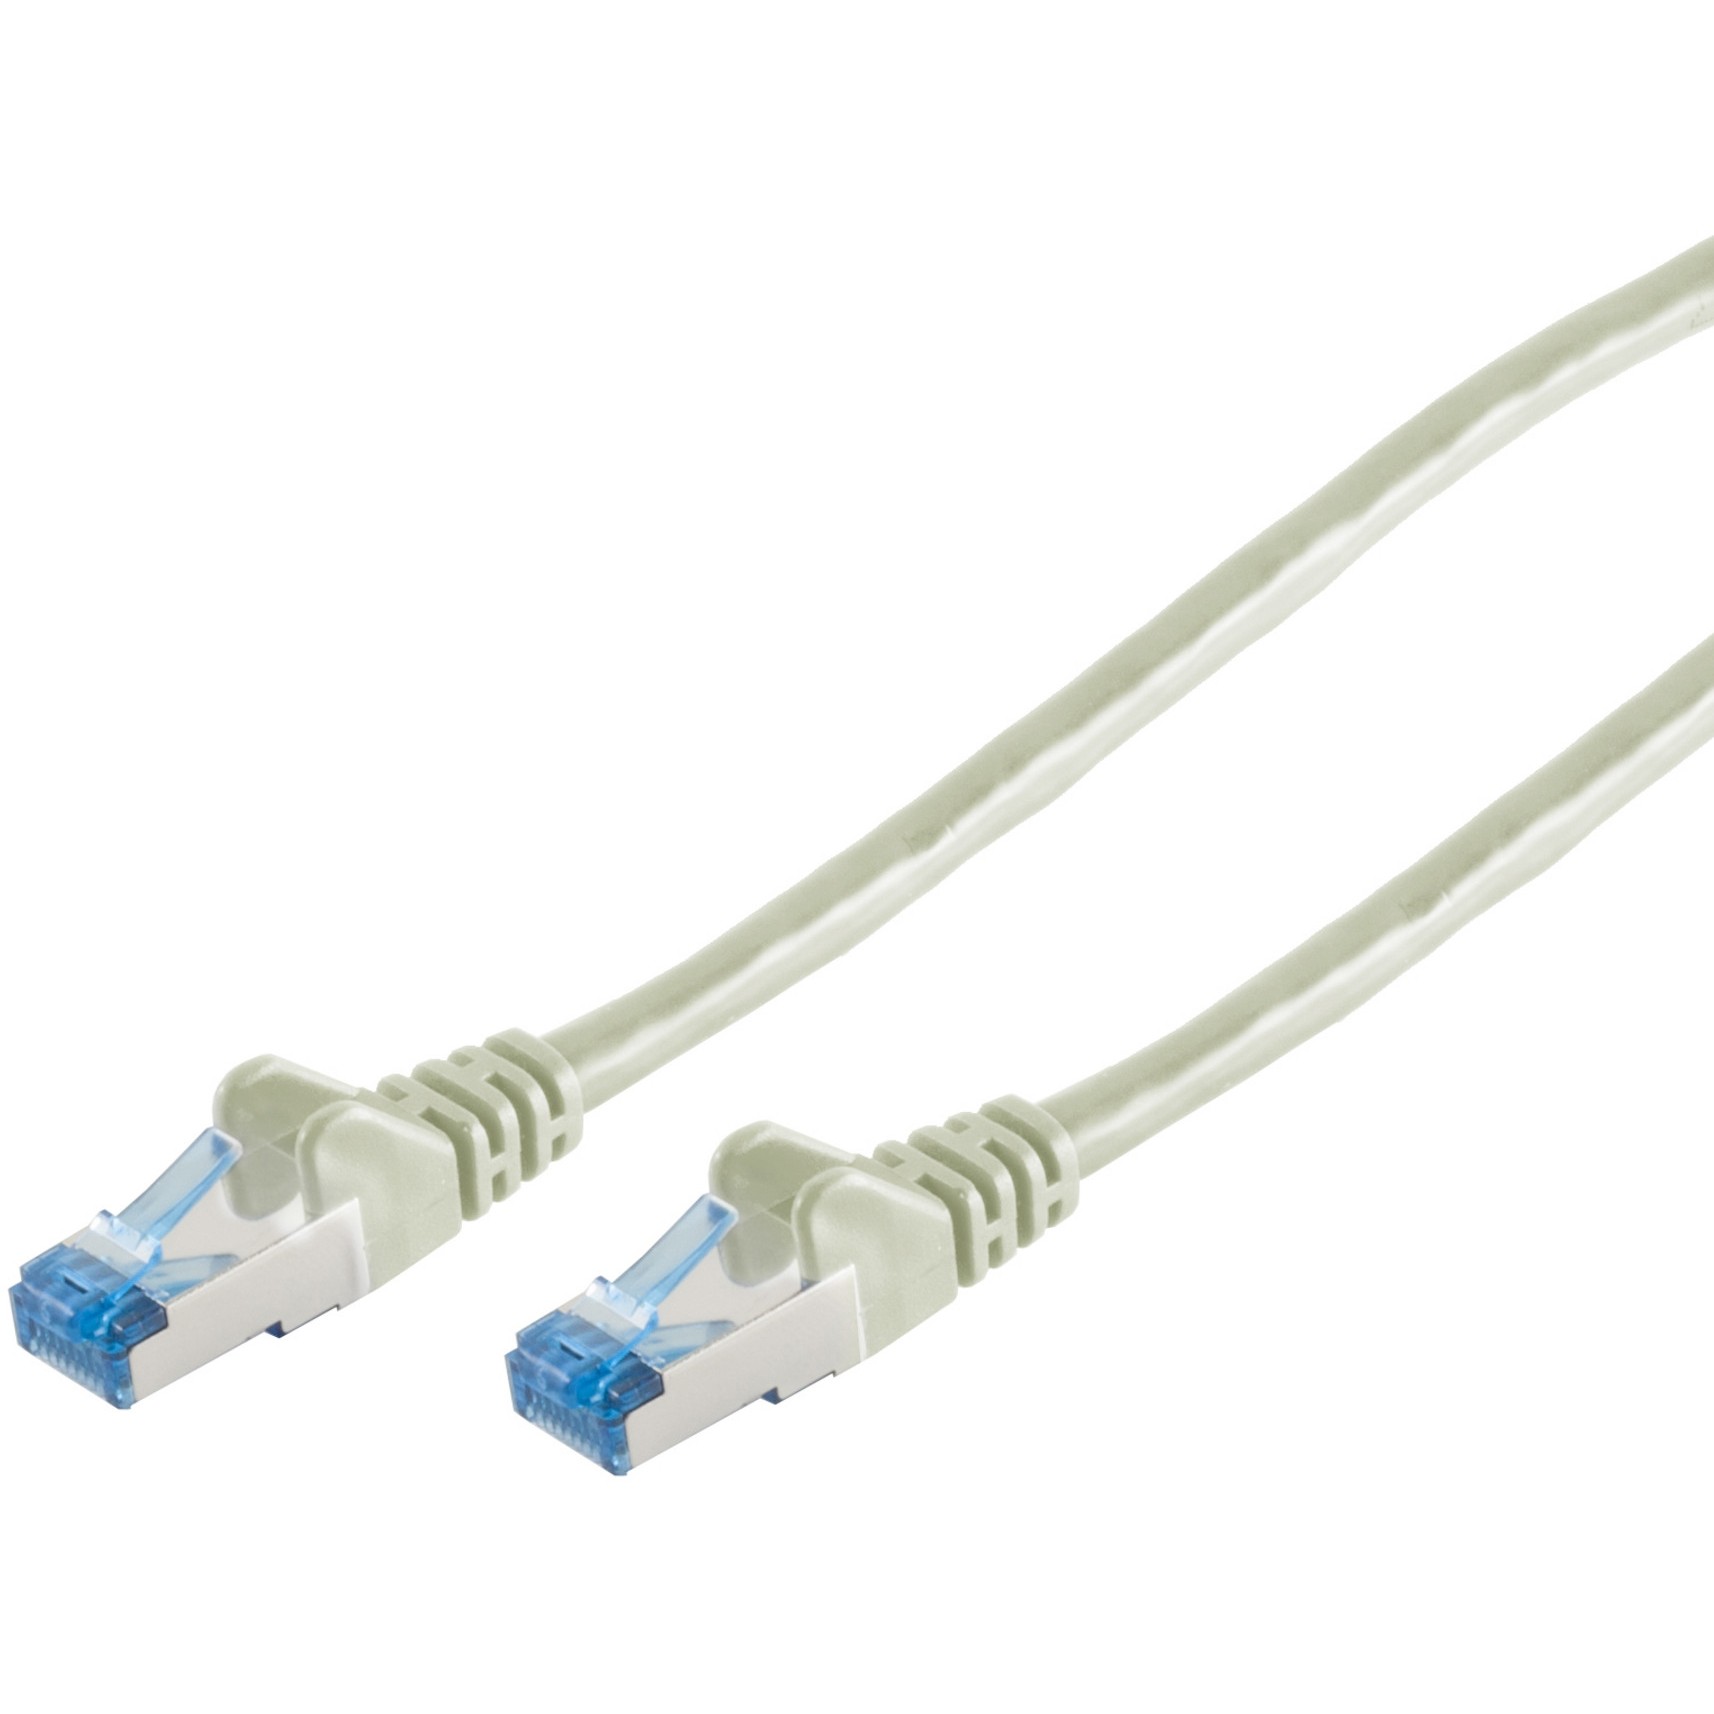 S-Conn 75711-0.25 networking cable